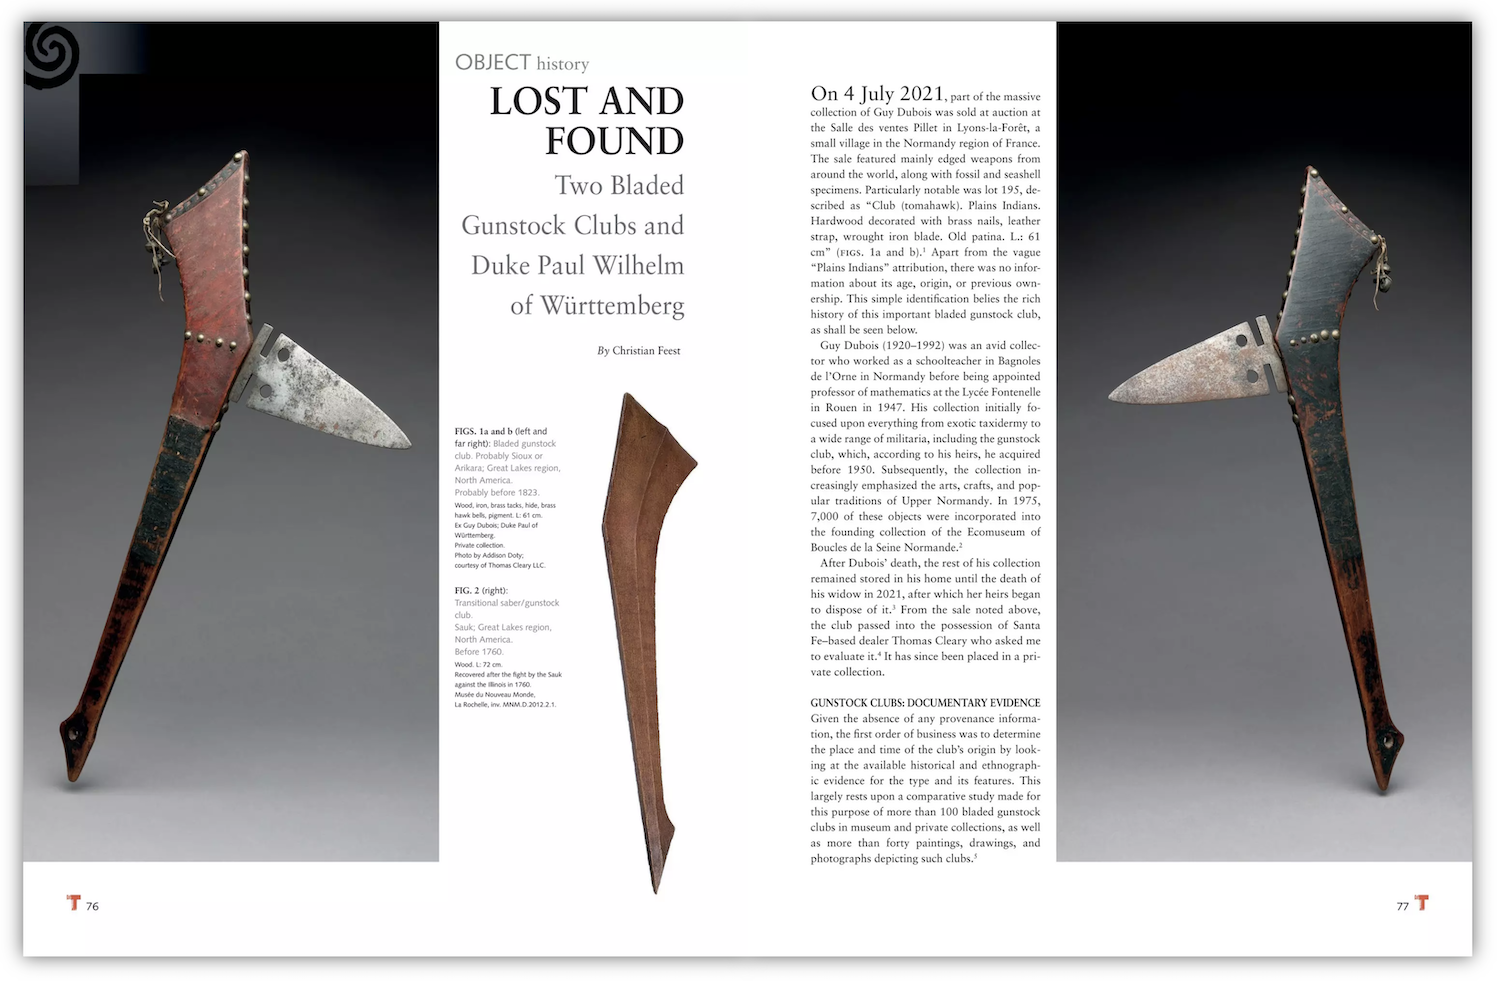     Lost and Found: Two Bladed Gunstock Clubs and Duke Paul Wilhelm of Würtemberg By Christian Feest